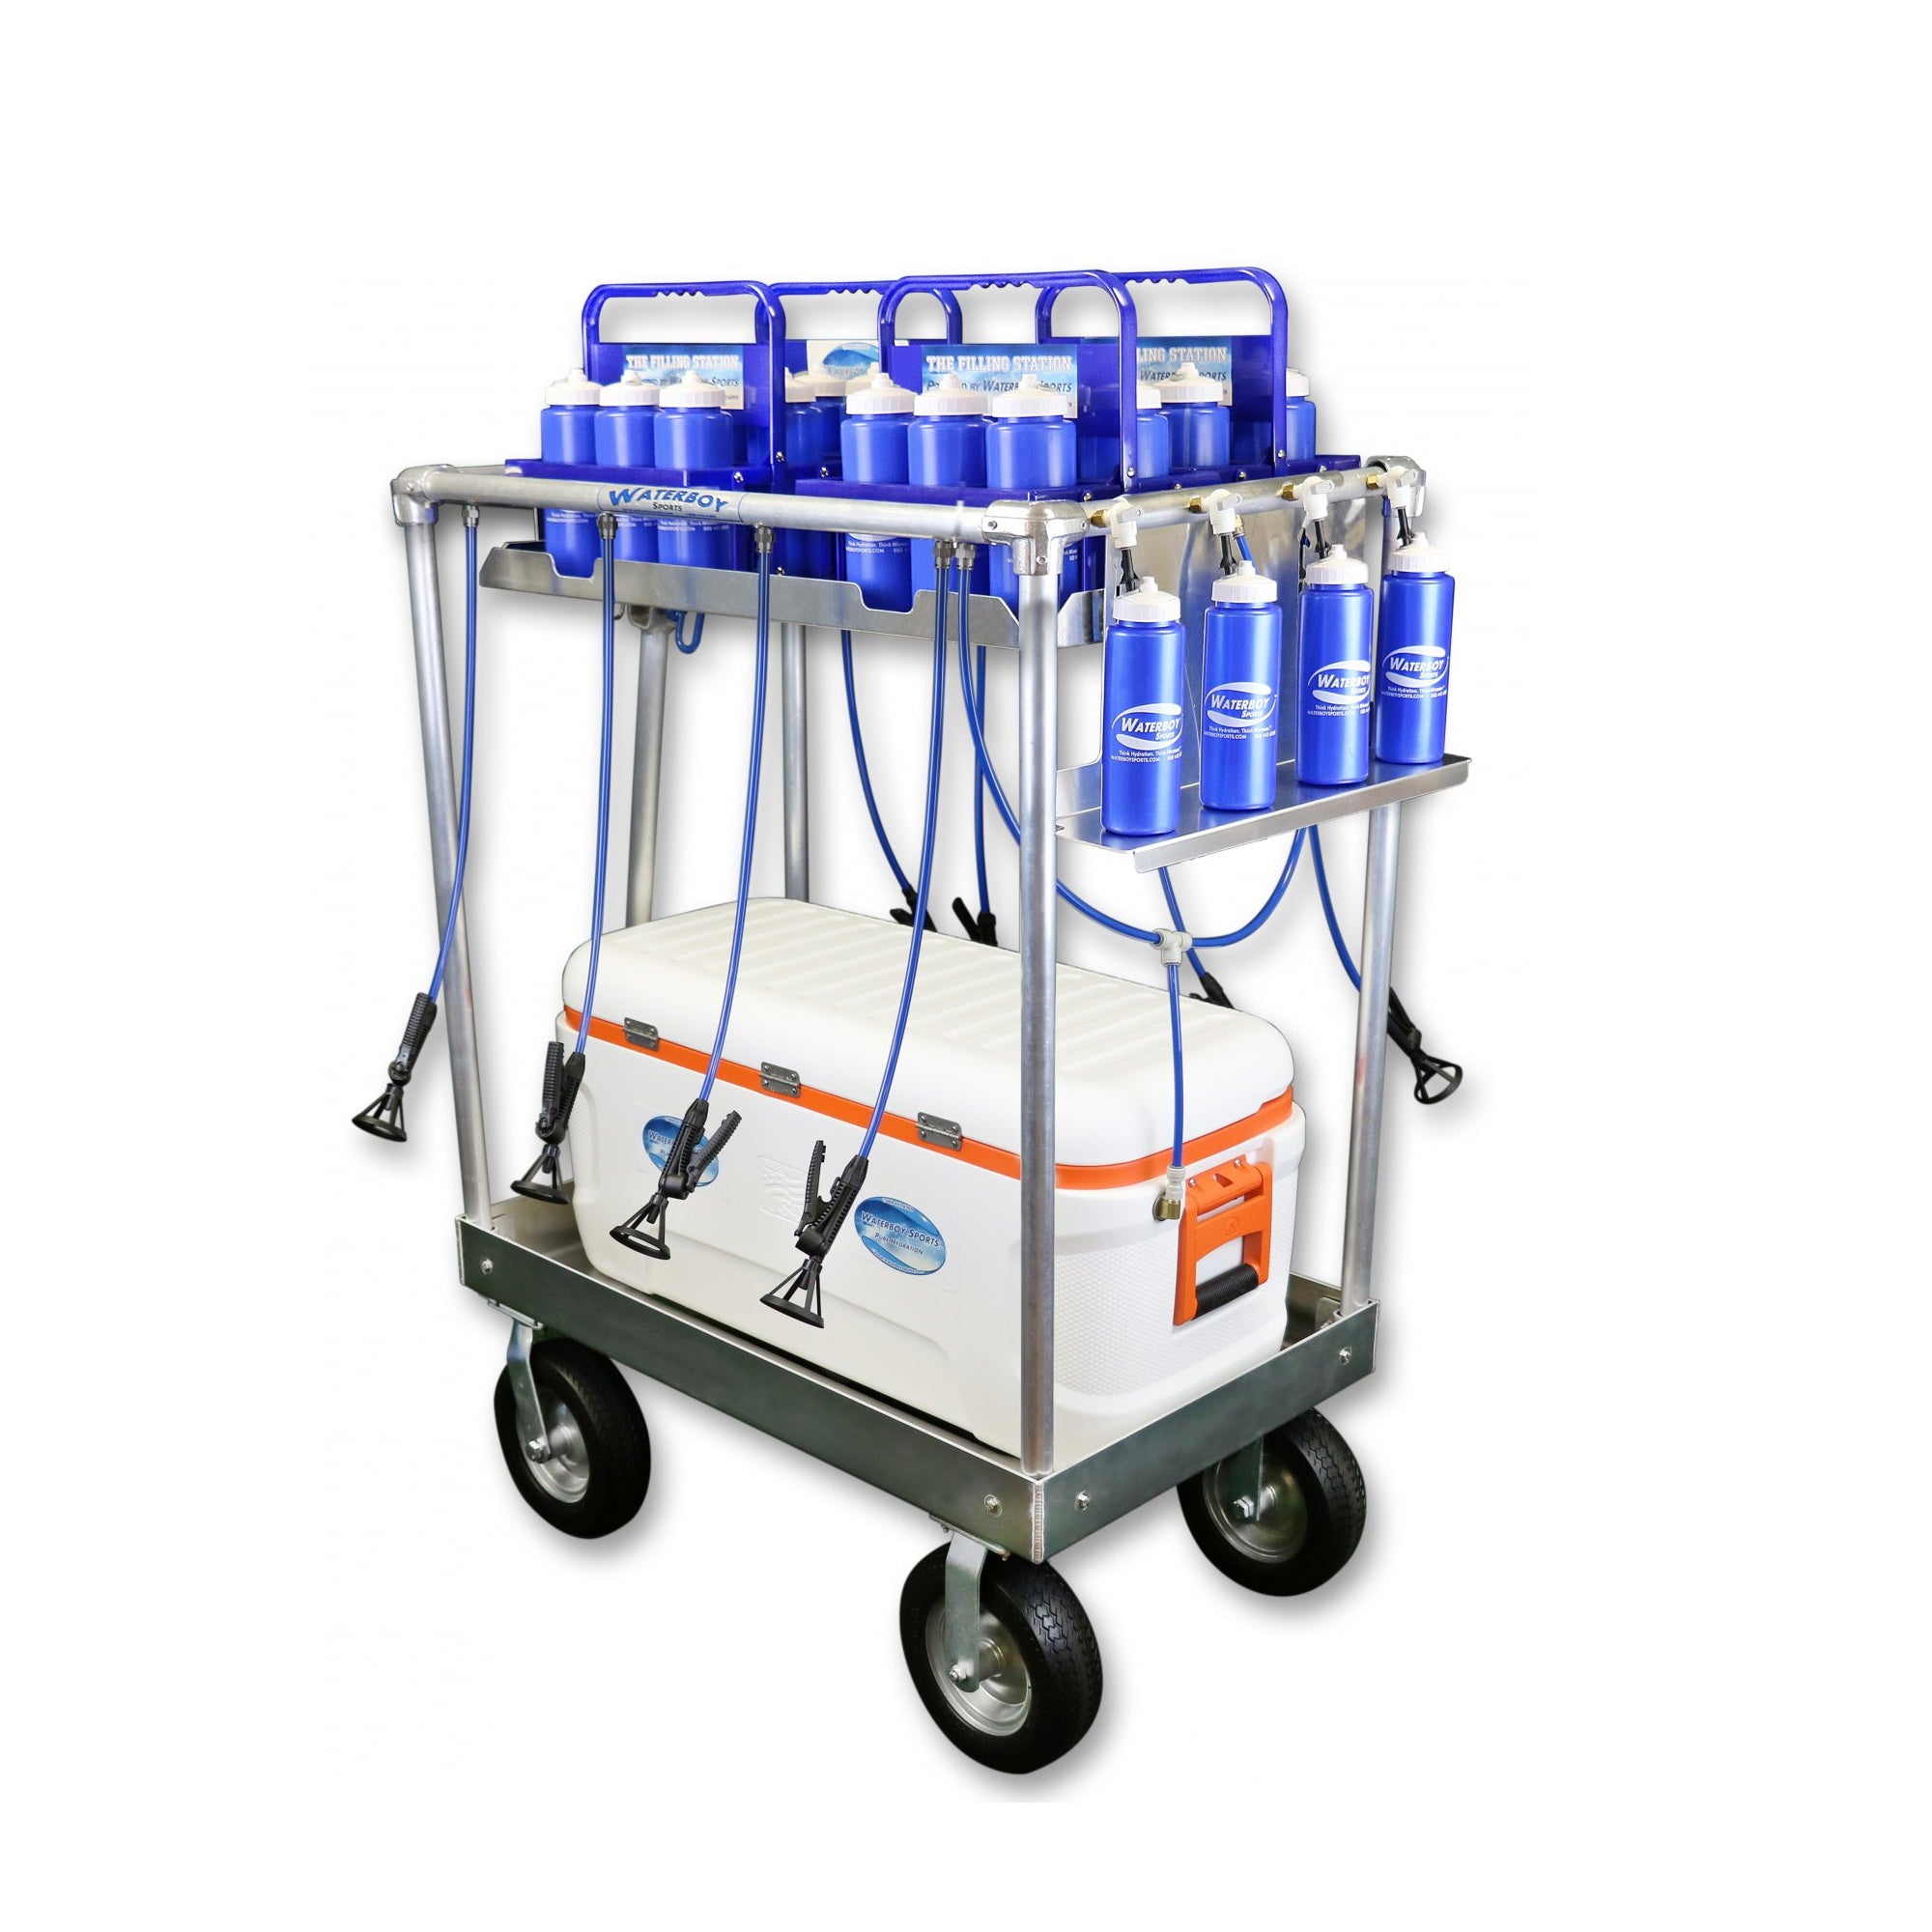 waterboy sports horizontal chiller filling station